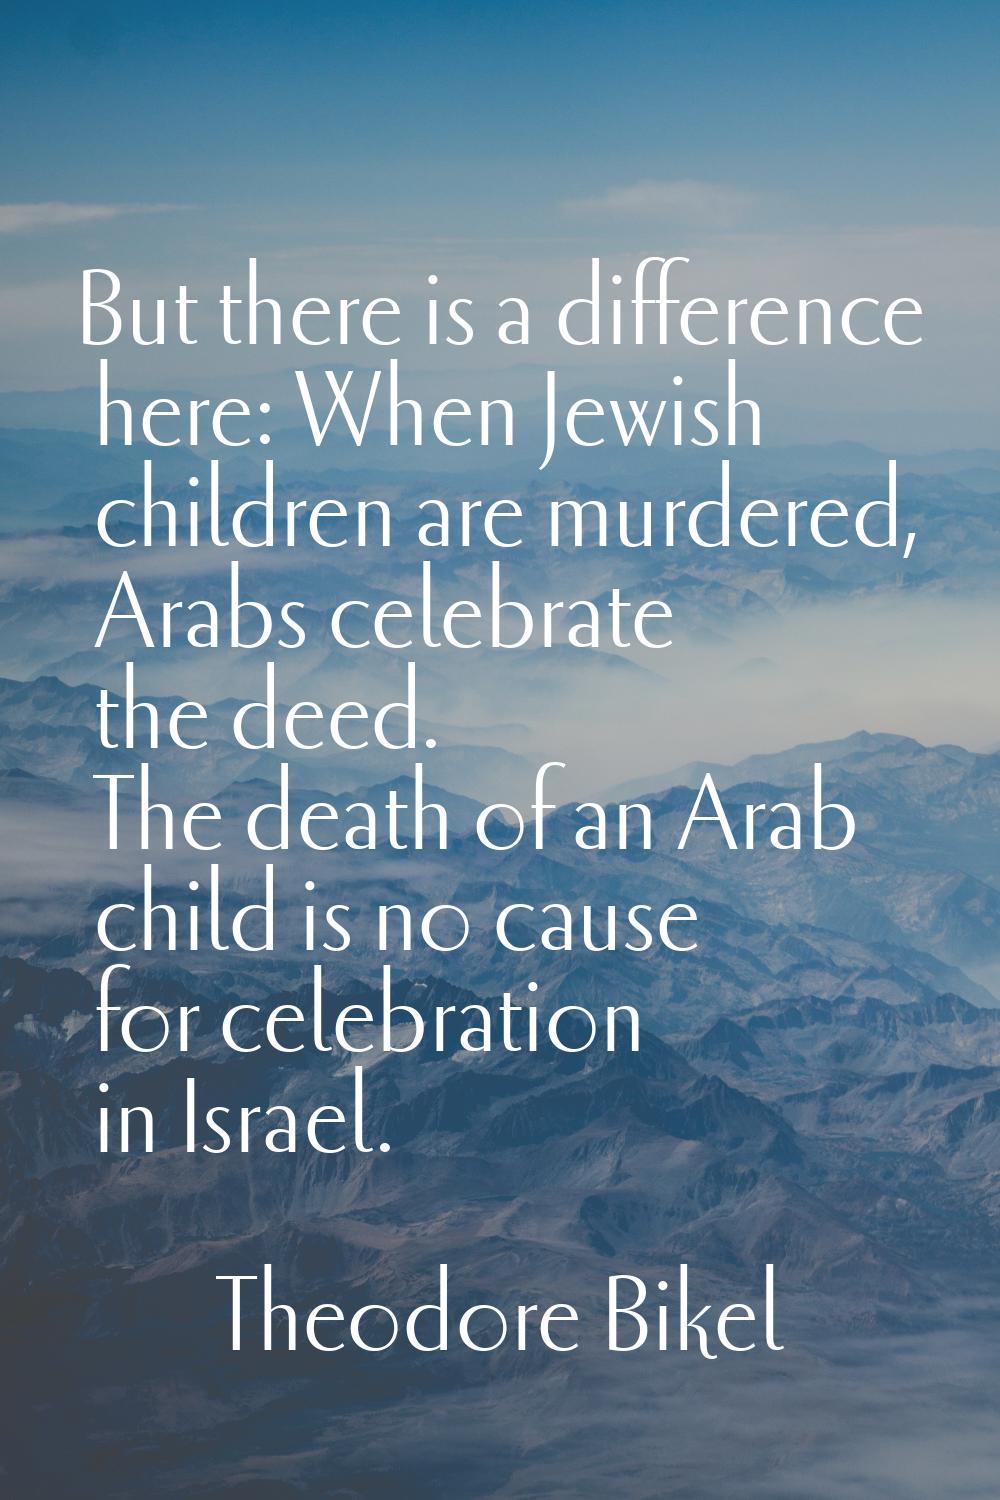 But there is a difference here: When Jewish children are murdered, Arabs celebrate the deed. The de